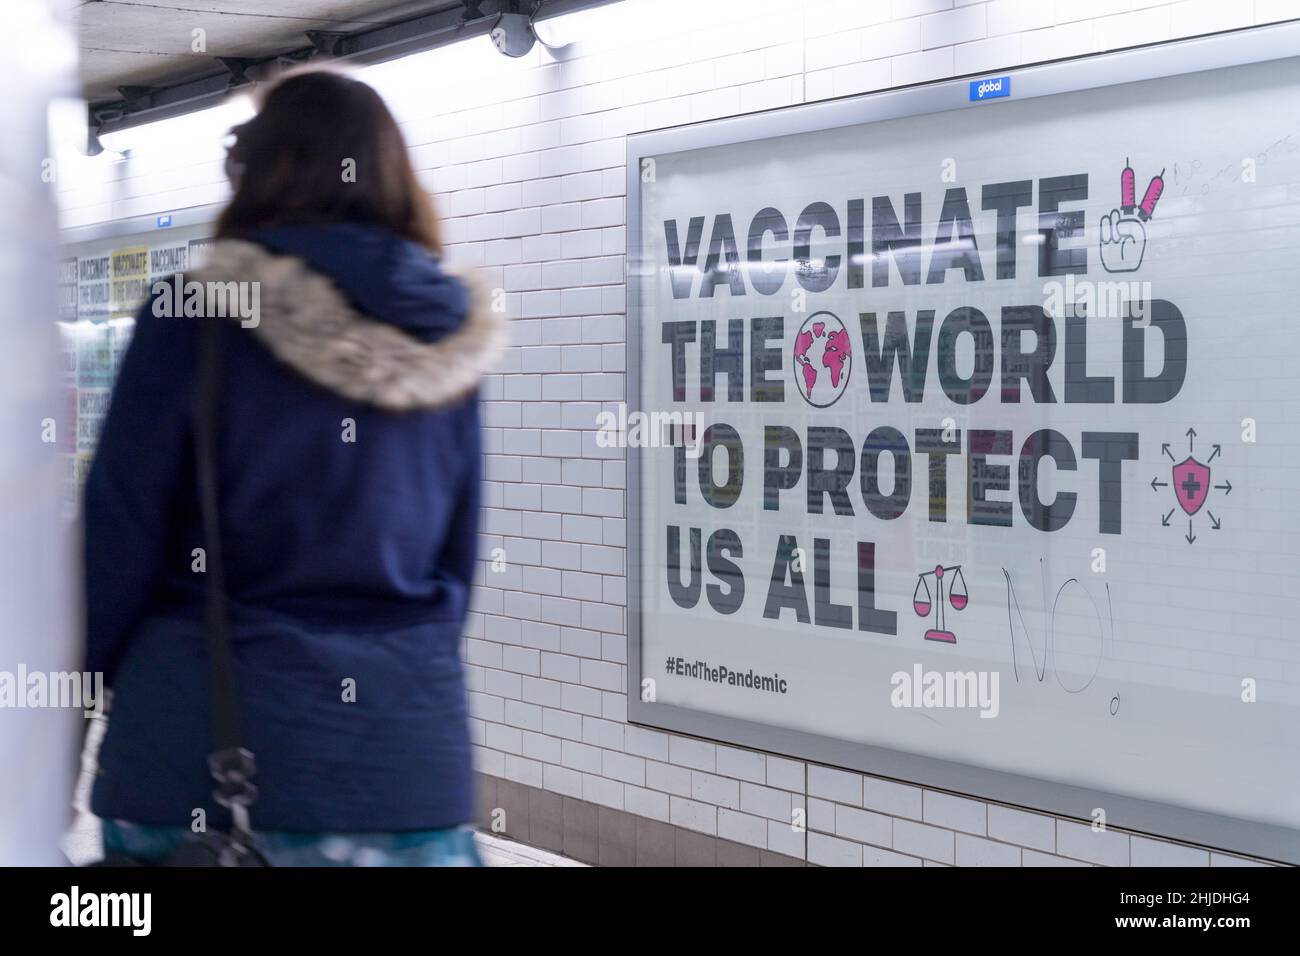 huge poster on the billboard showing 'vaccine the world to protect us all', London England UK self Isolation rules  covid restriction ending early Stock Photo